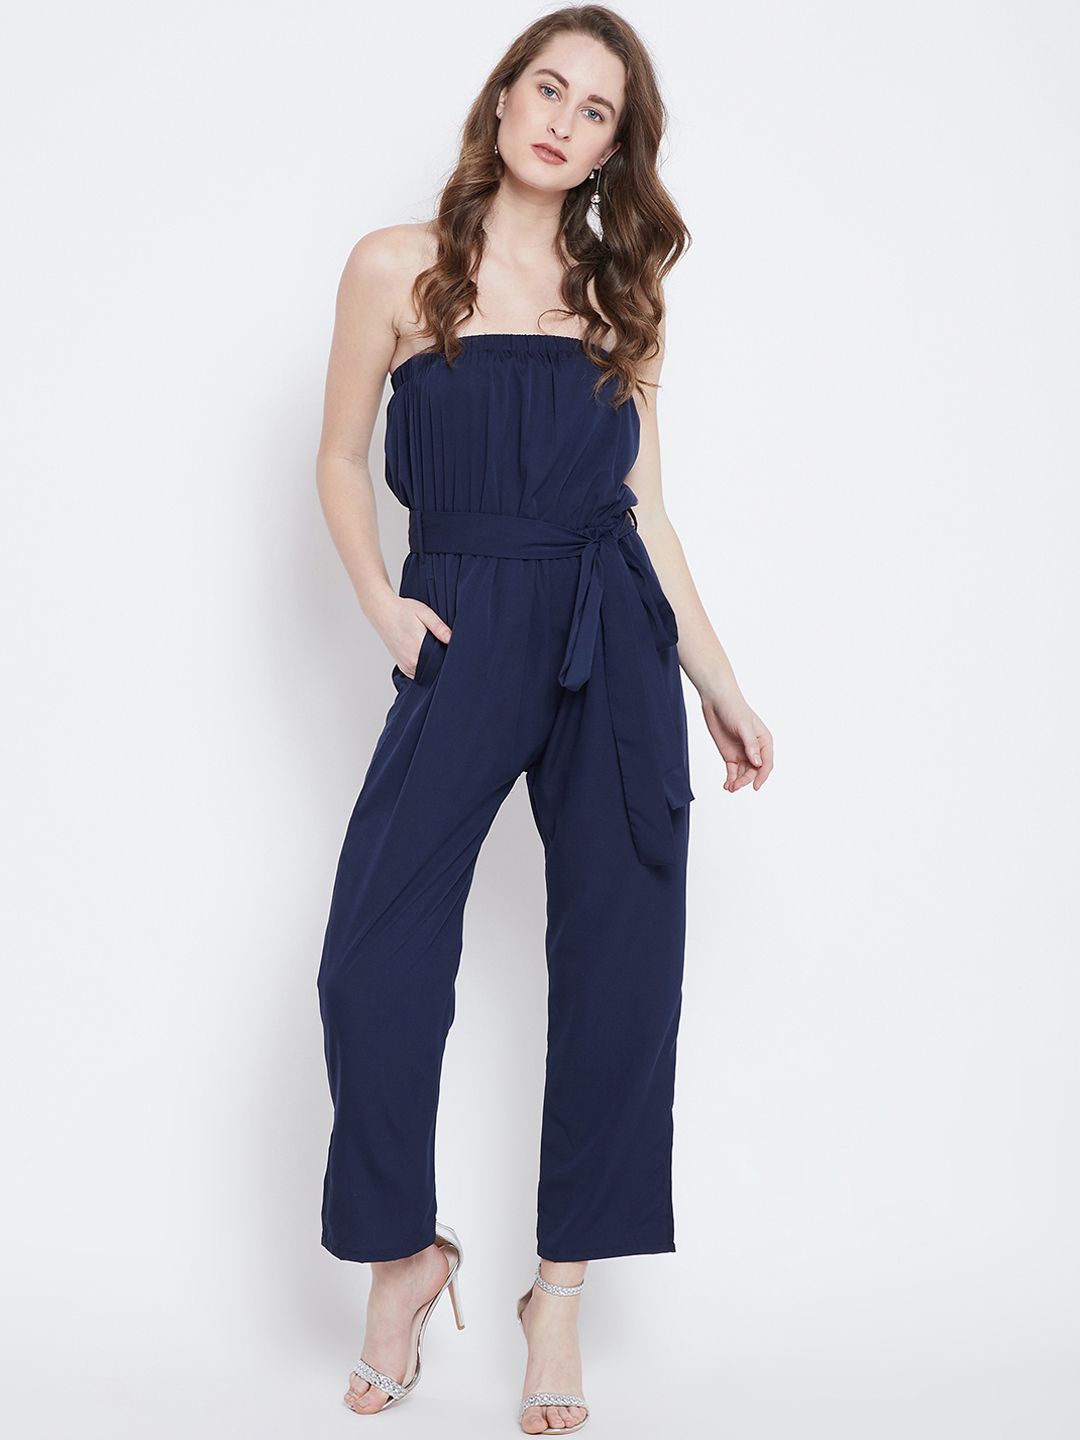 Berrylush Navy Blue Solid Basic Jumpsuit Price in India